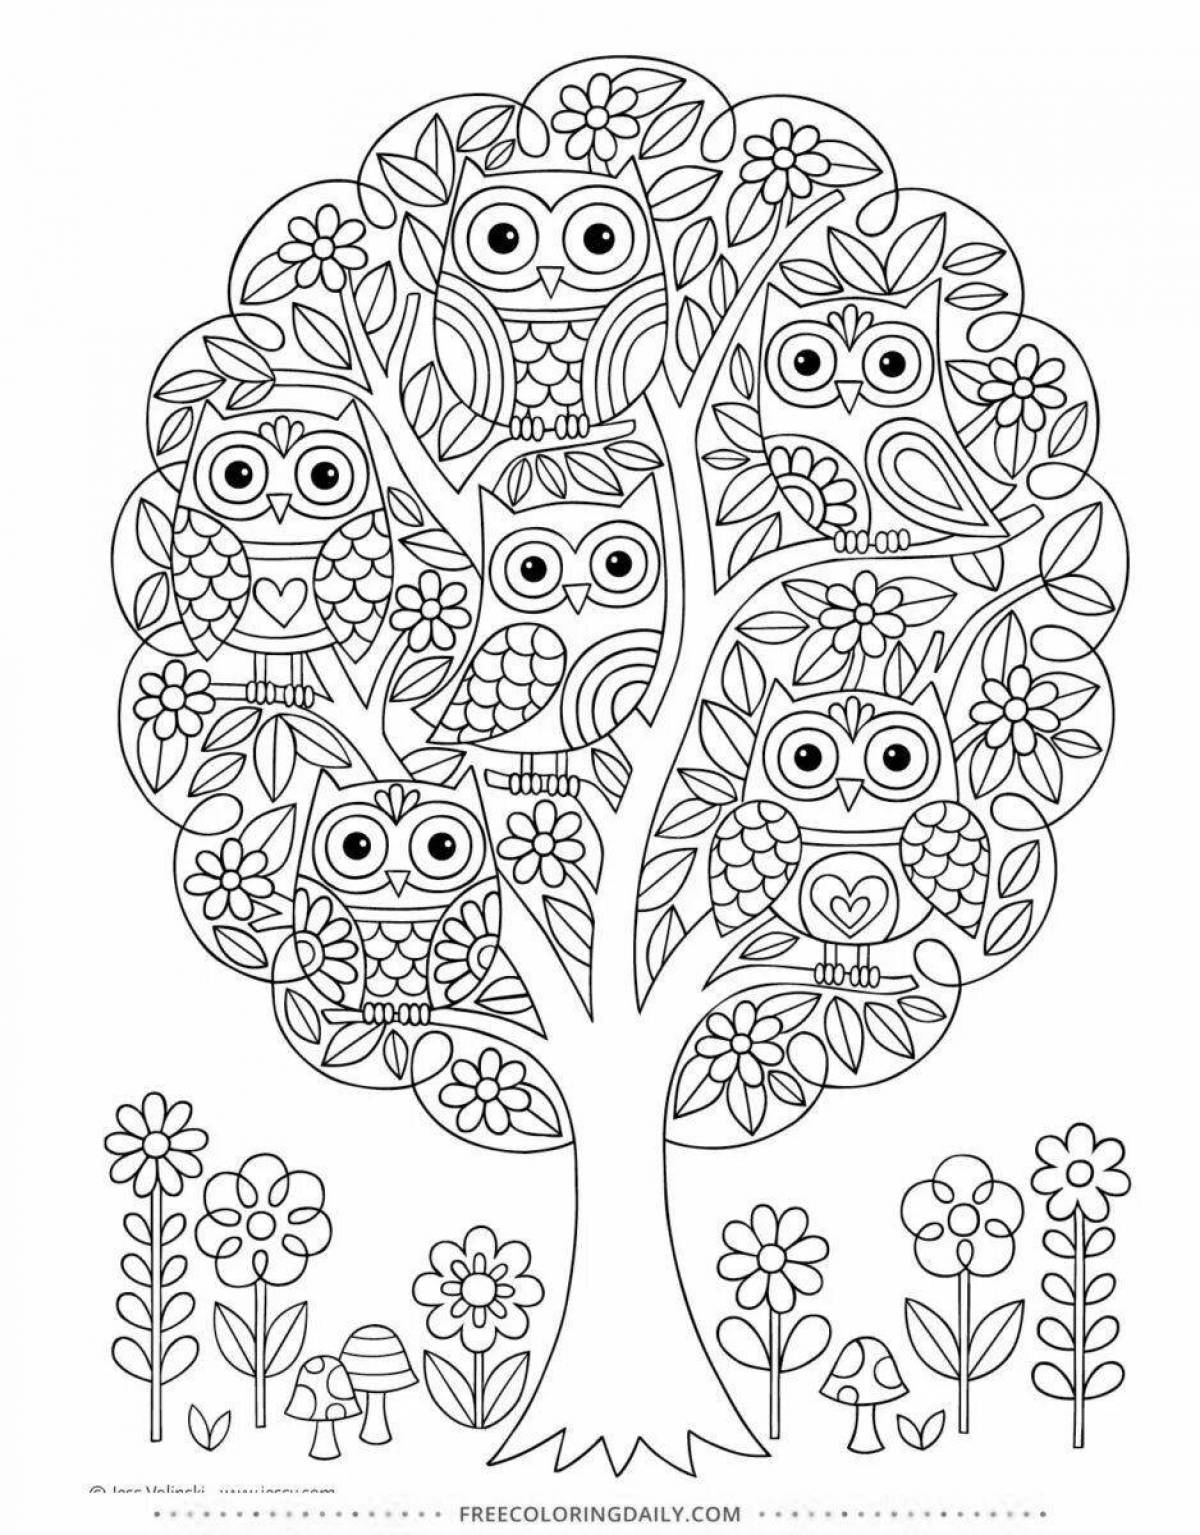 Colorful psychological coloring book for kids